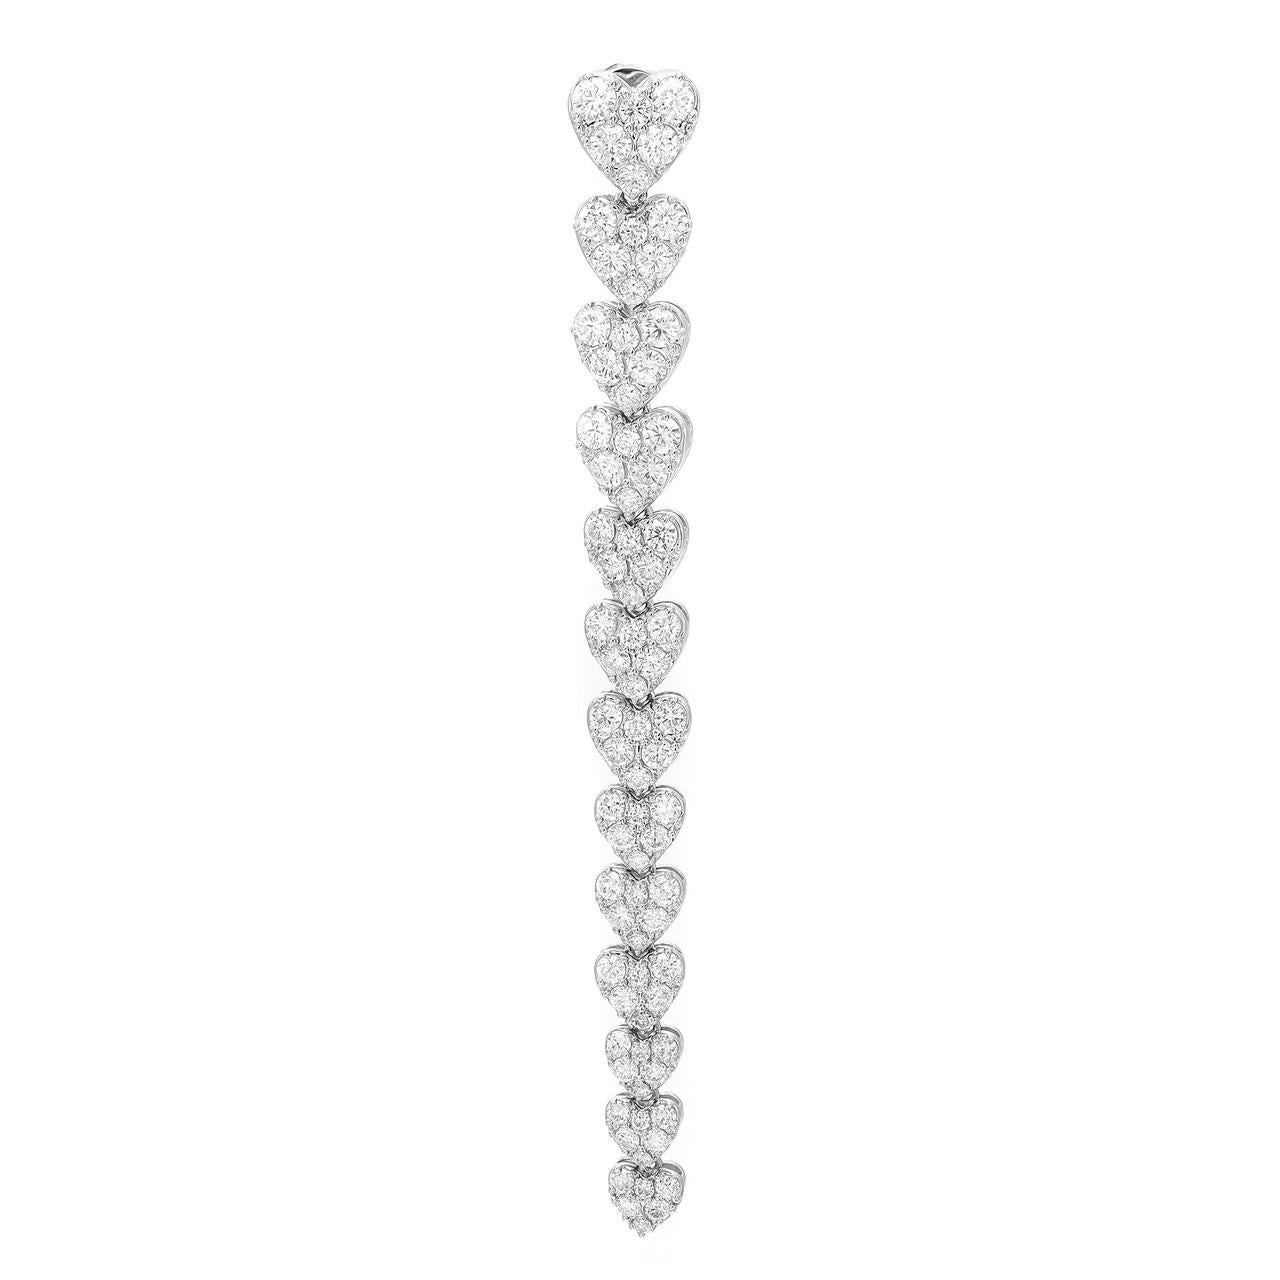 Add a touch of enchantment to your style with the elegant 4.11 Carat Diamond Heart Drop Earrings in 18K White Gold. These exquisite earrings feature a leafy, love-inspired design that will illuminate your look. Crafted with precision, each earring